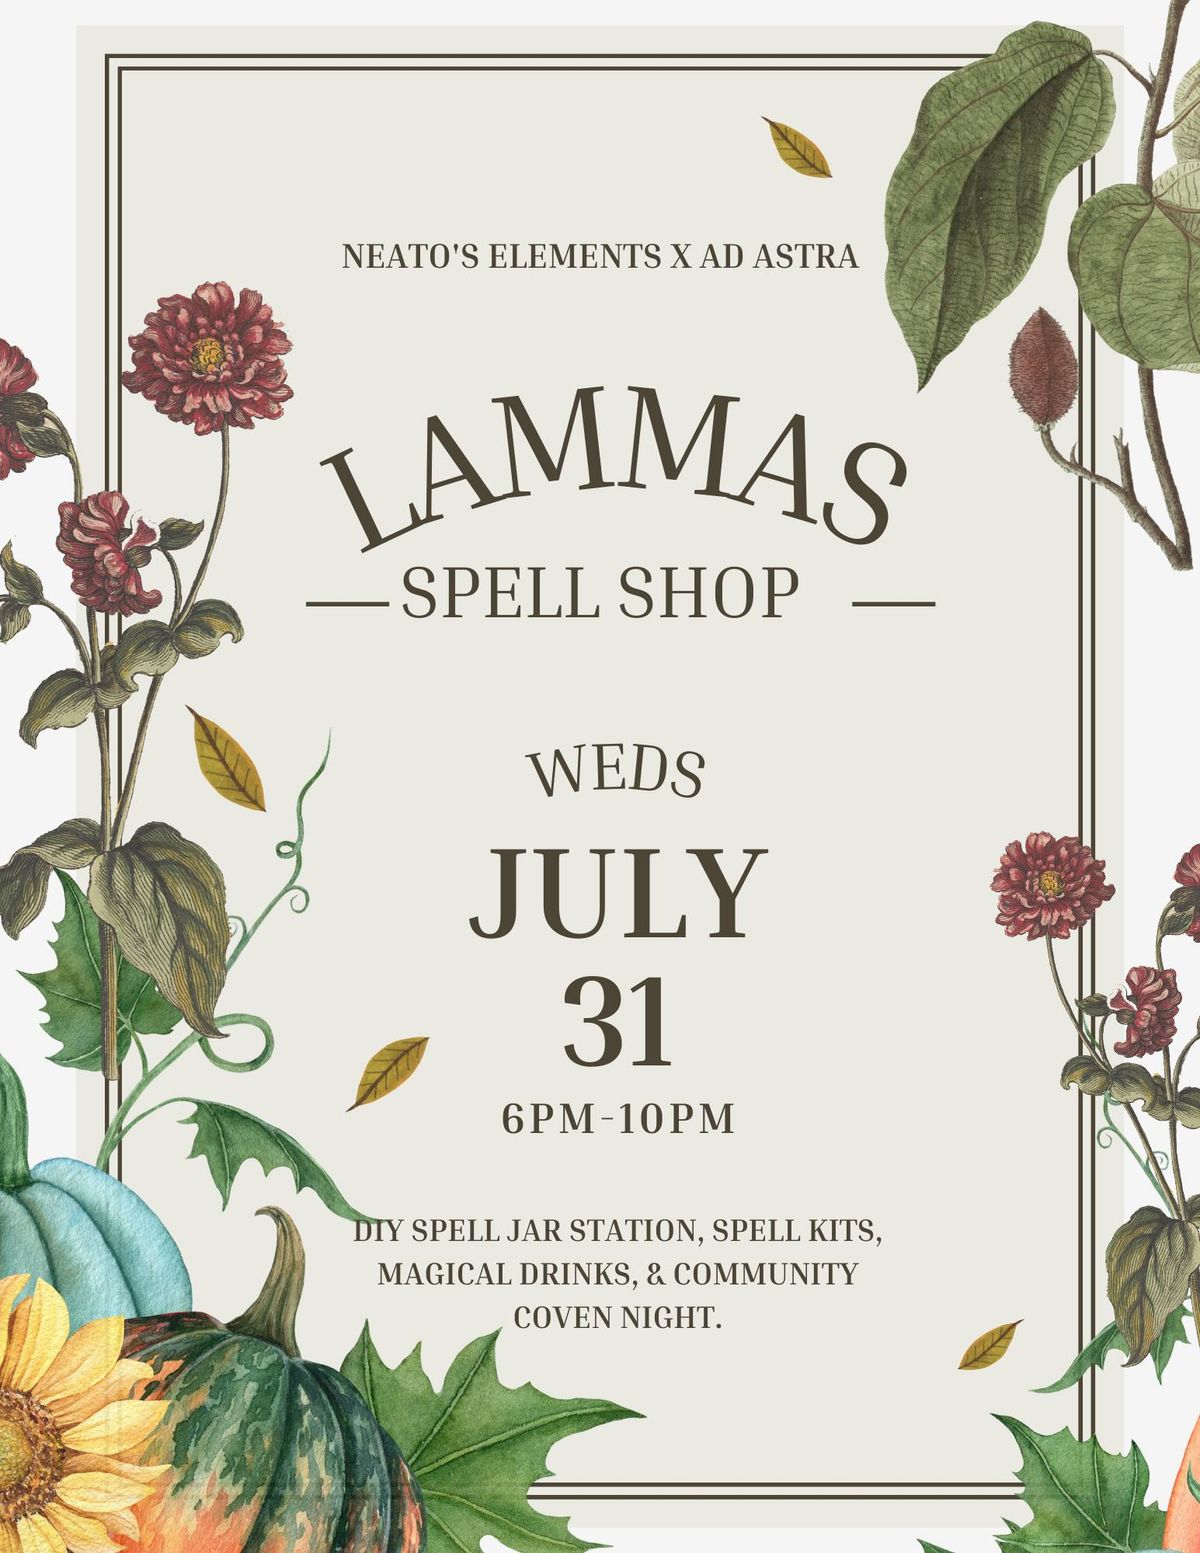 Celebrate Lammas with Ad Astra and Neato's Elements